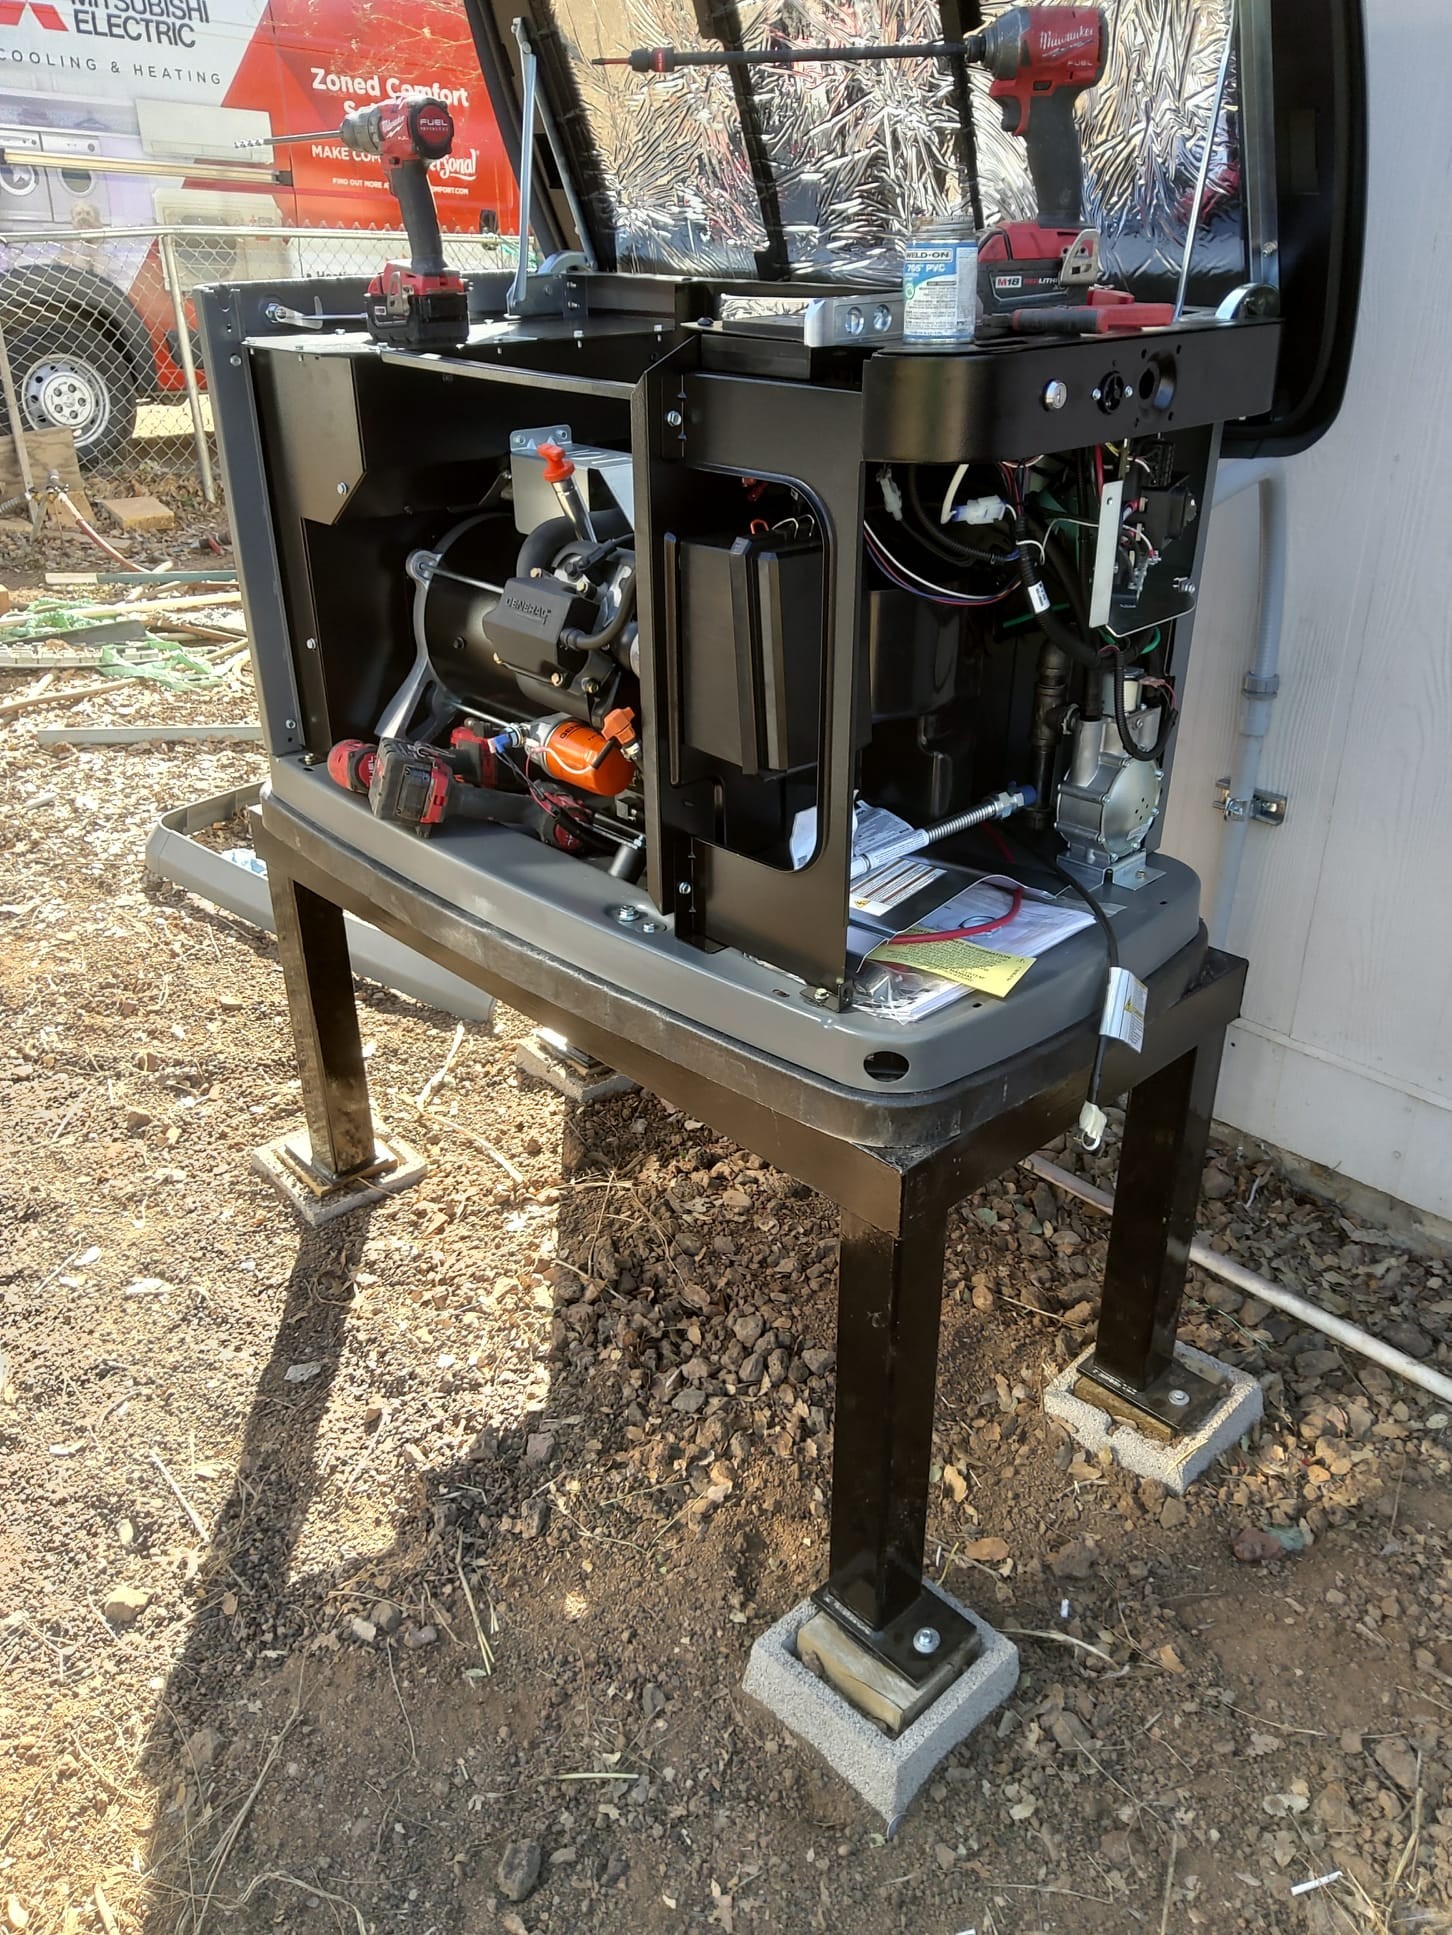 Generator on a stand